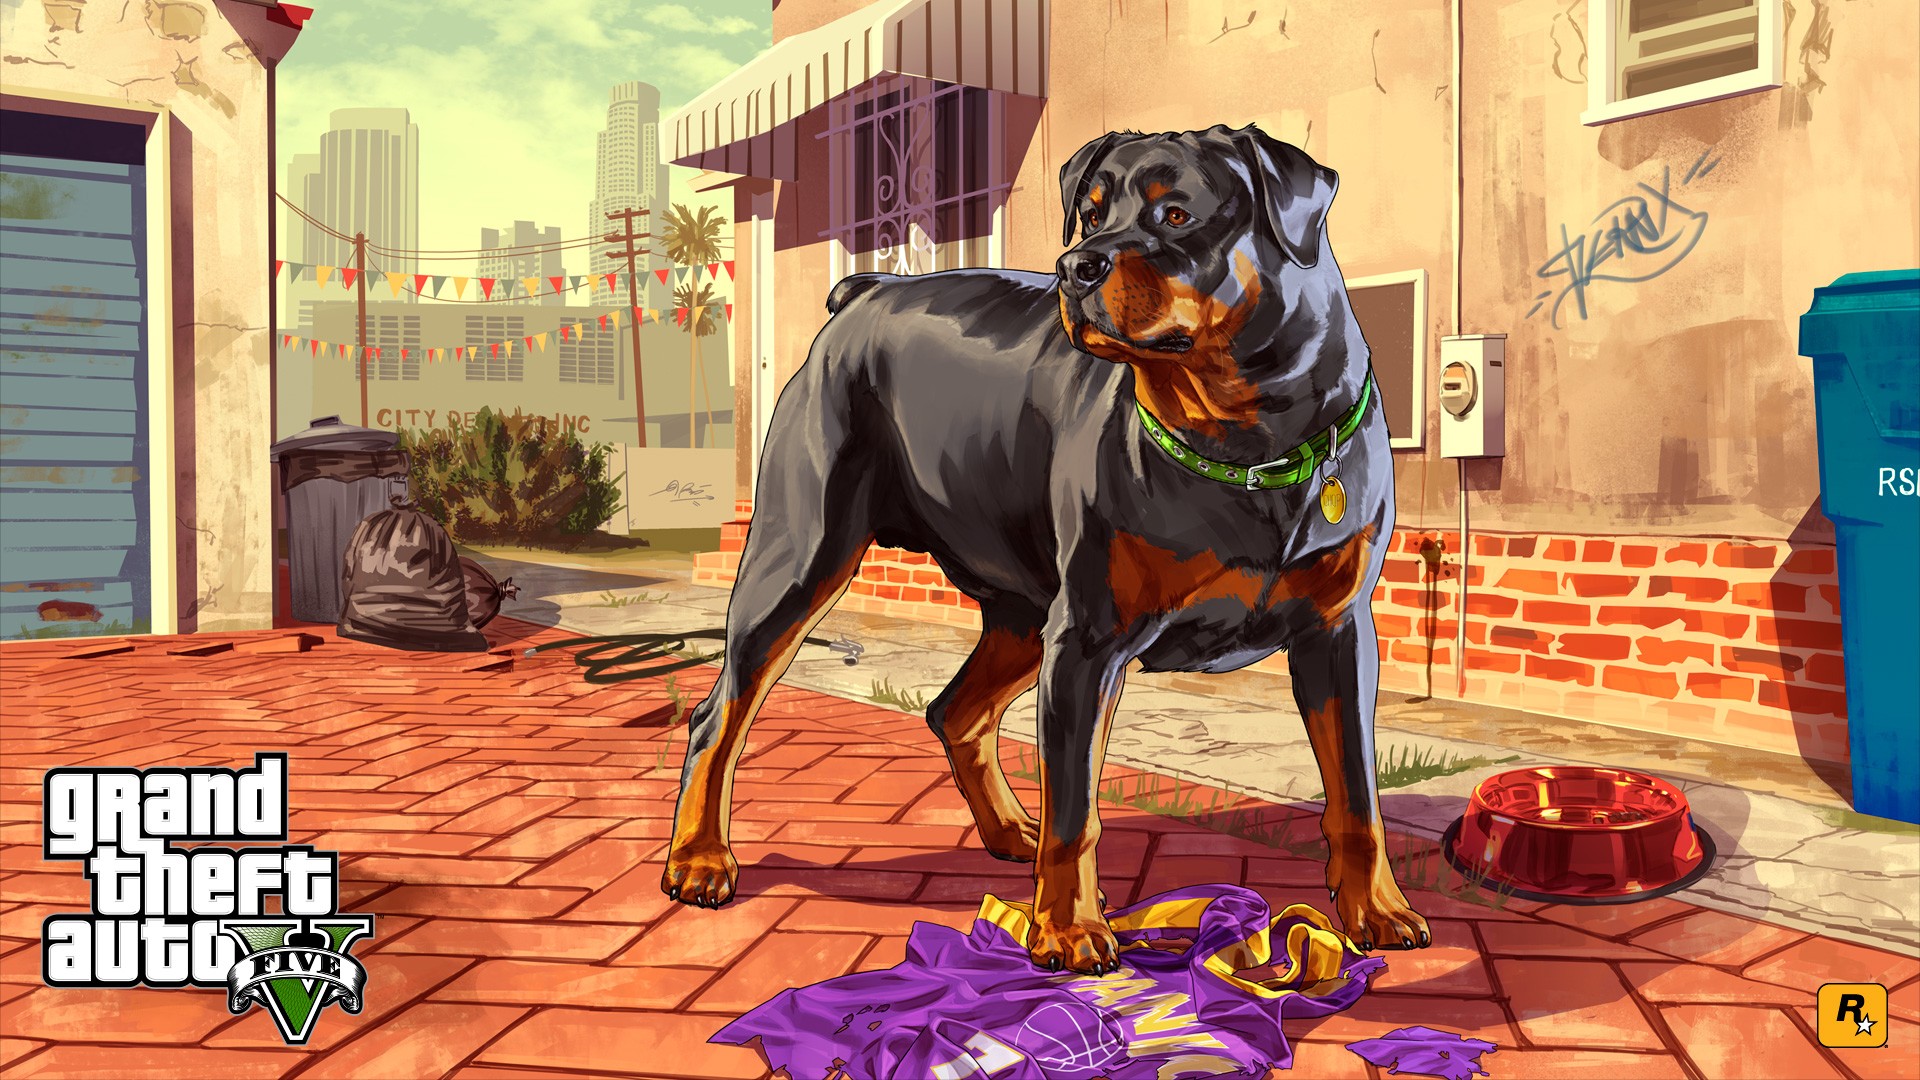 General 1920x1080 Grand Theft Auto V dog video games PC gaming video game art animals mammals